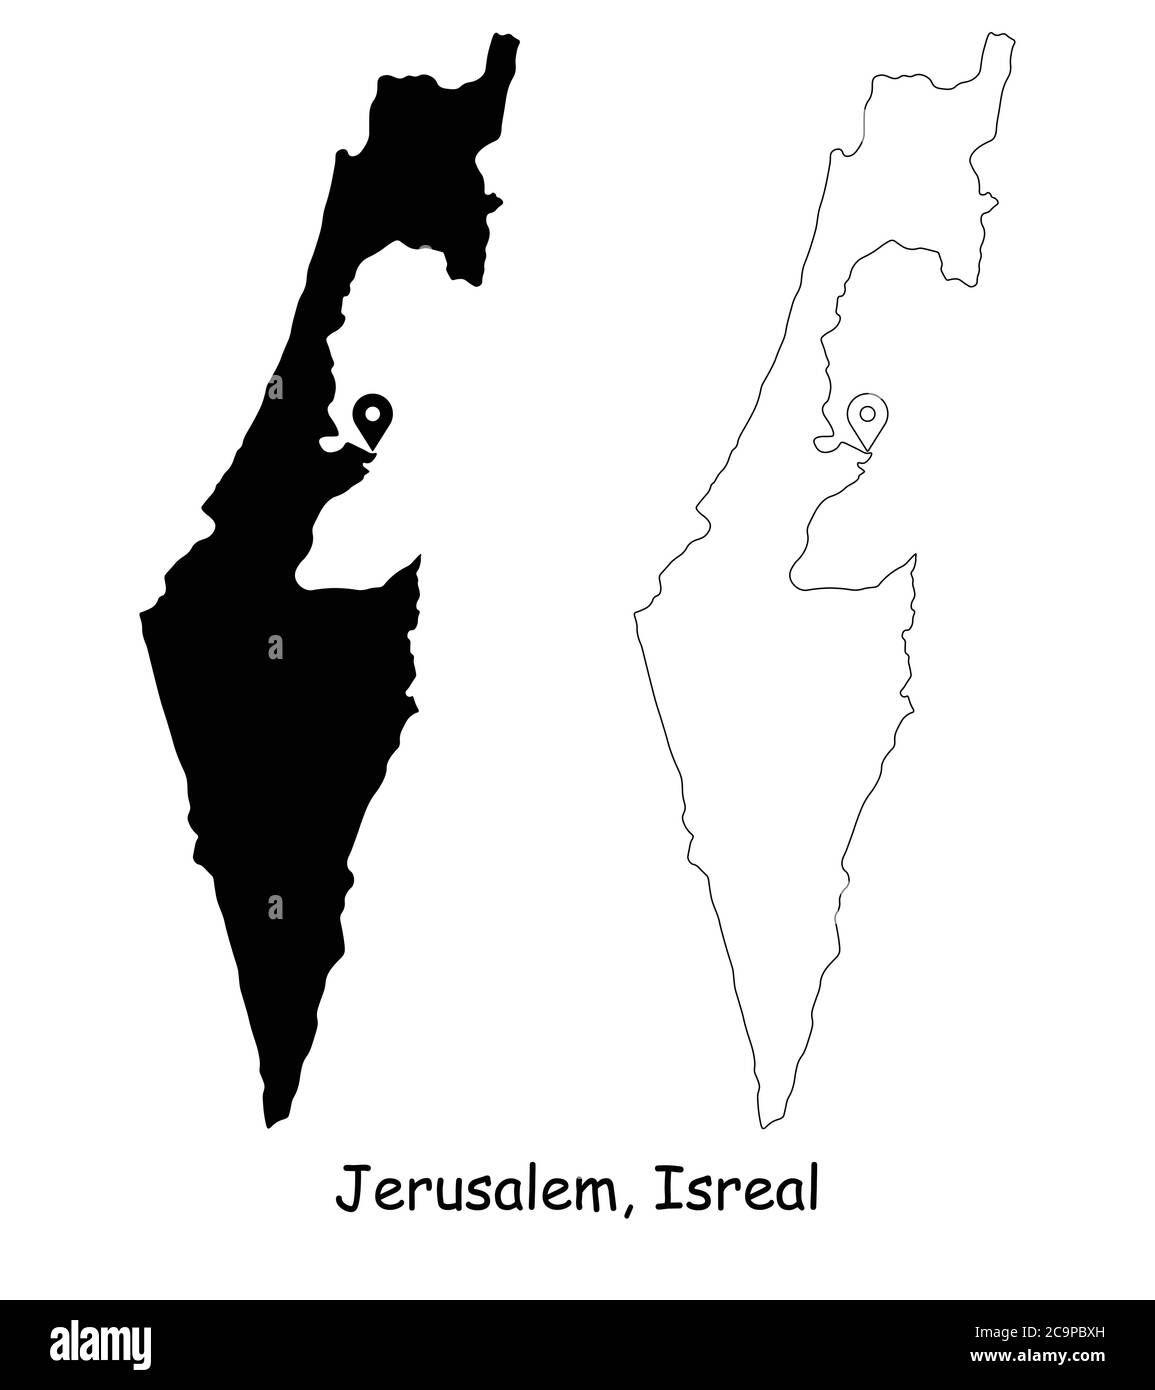 Jerusalem Israel. Detailed Country Map with Location Pin on Capital City. Black silhouette and outline maps isolated on white background. EPS Vector Stock Vector